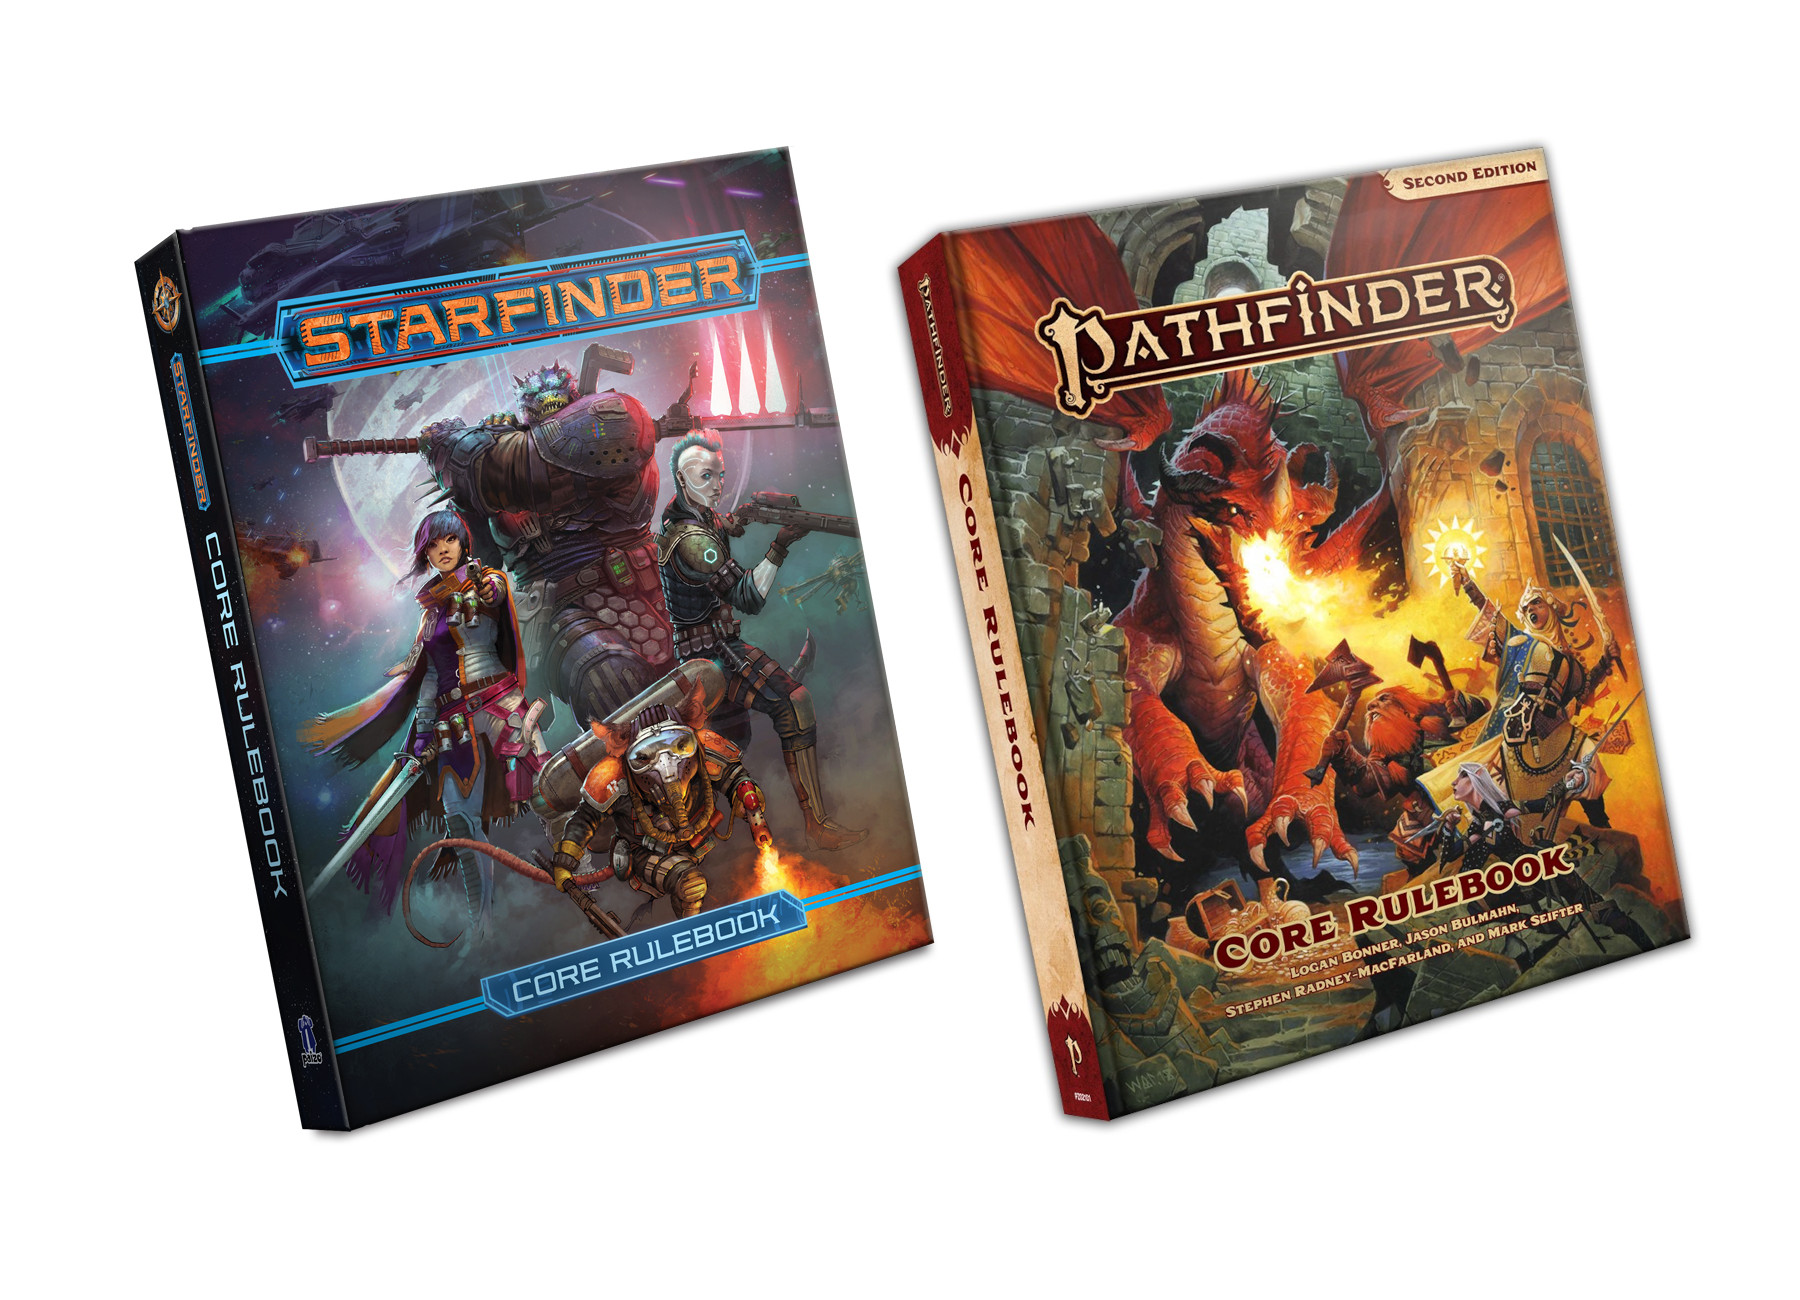 Pathfinder Second Edition Core Rulebook and Starfinder Core Rulebook Digital CD Key 12.58$